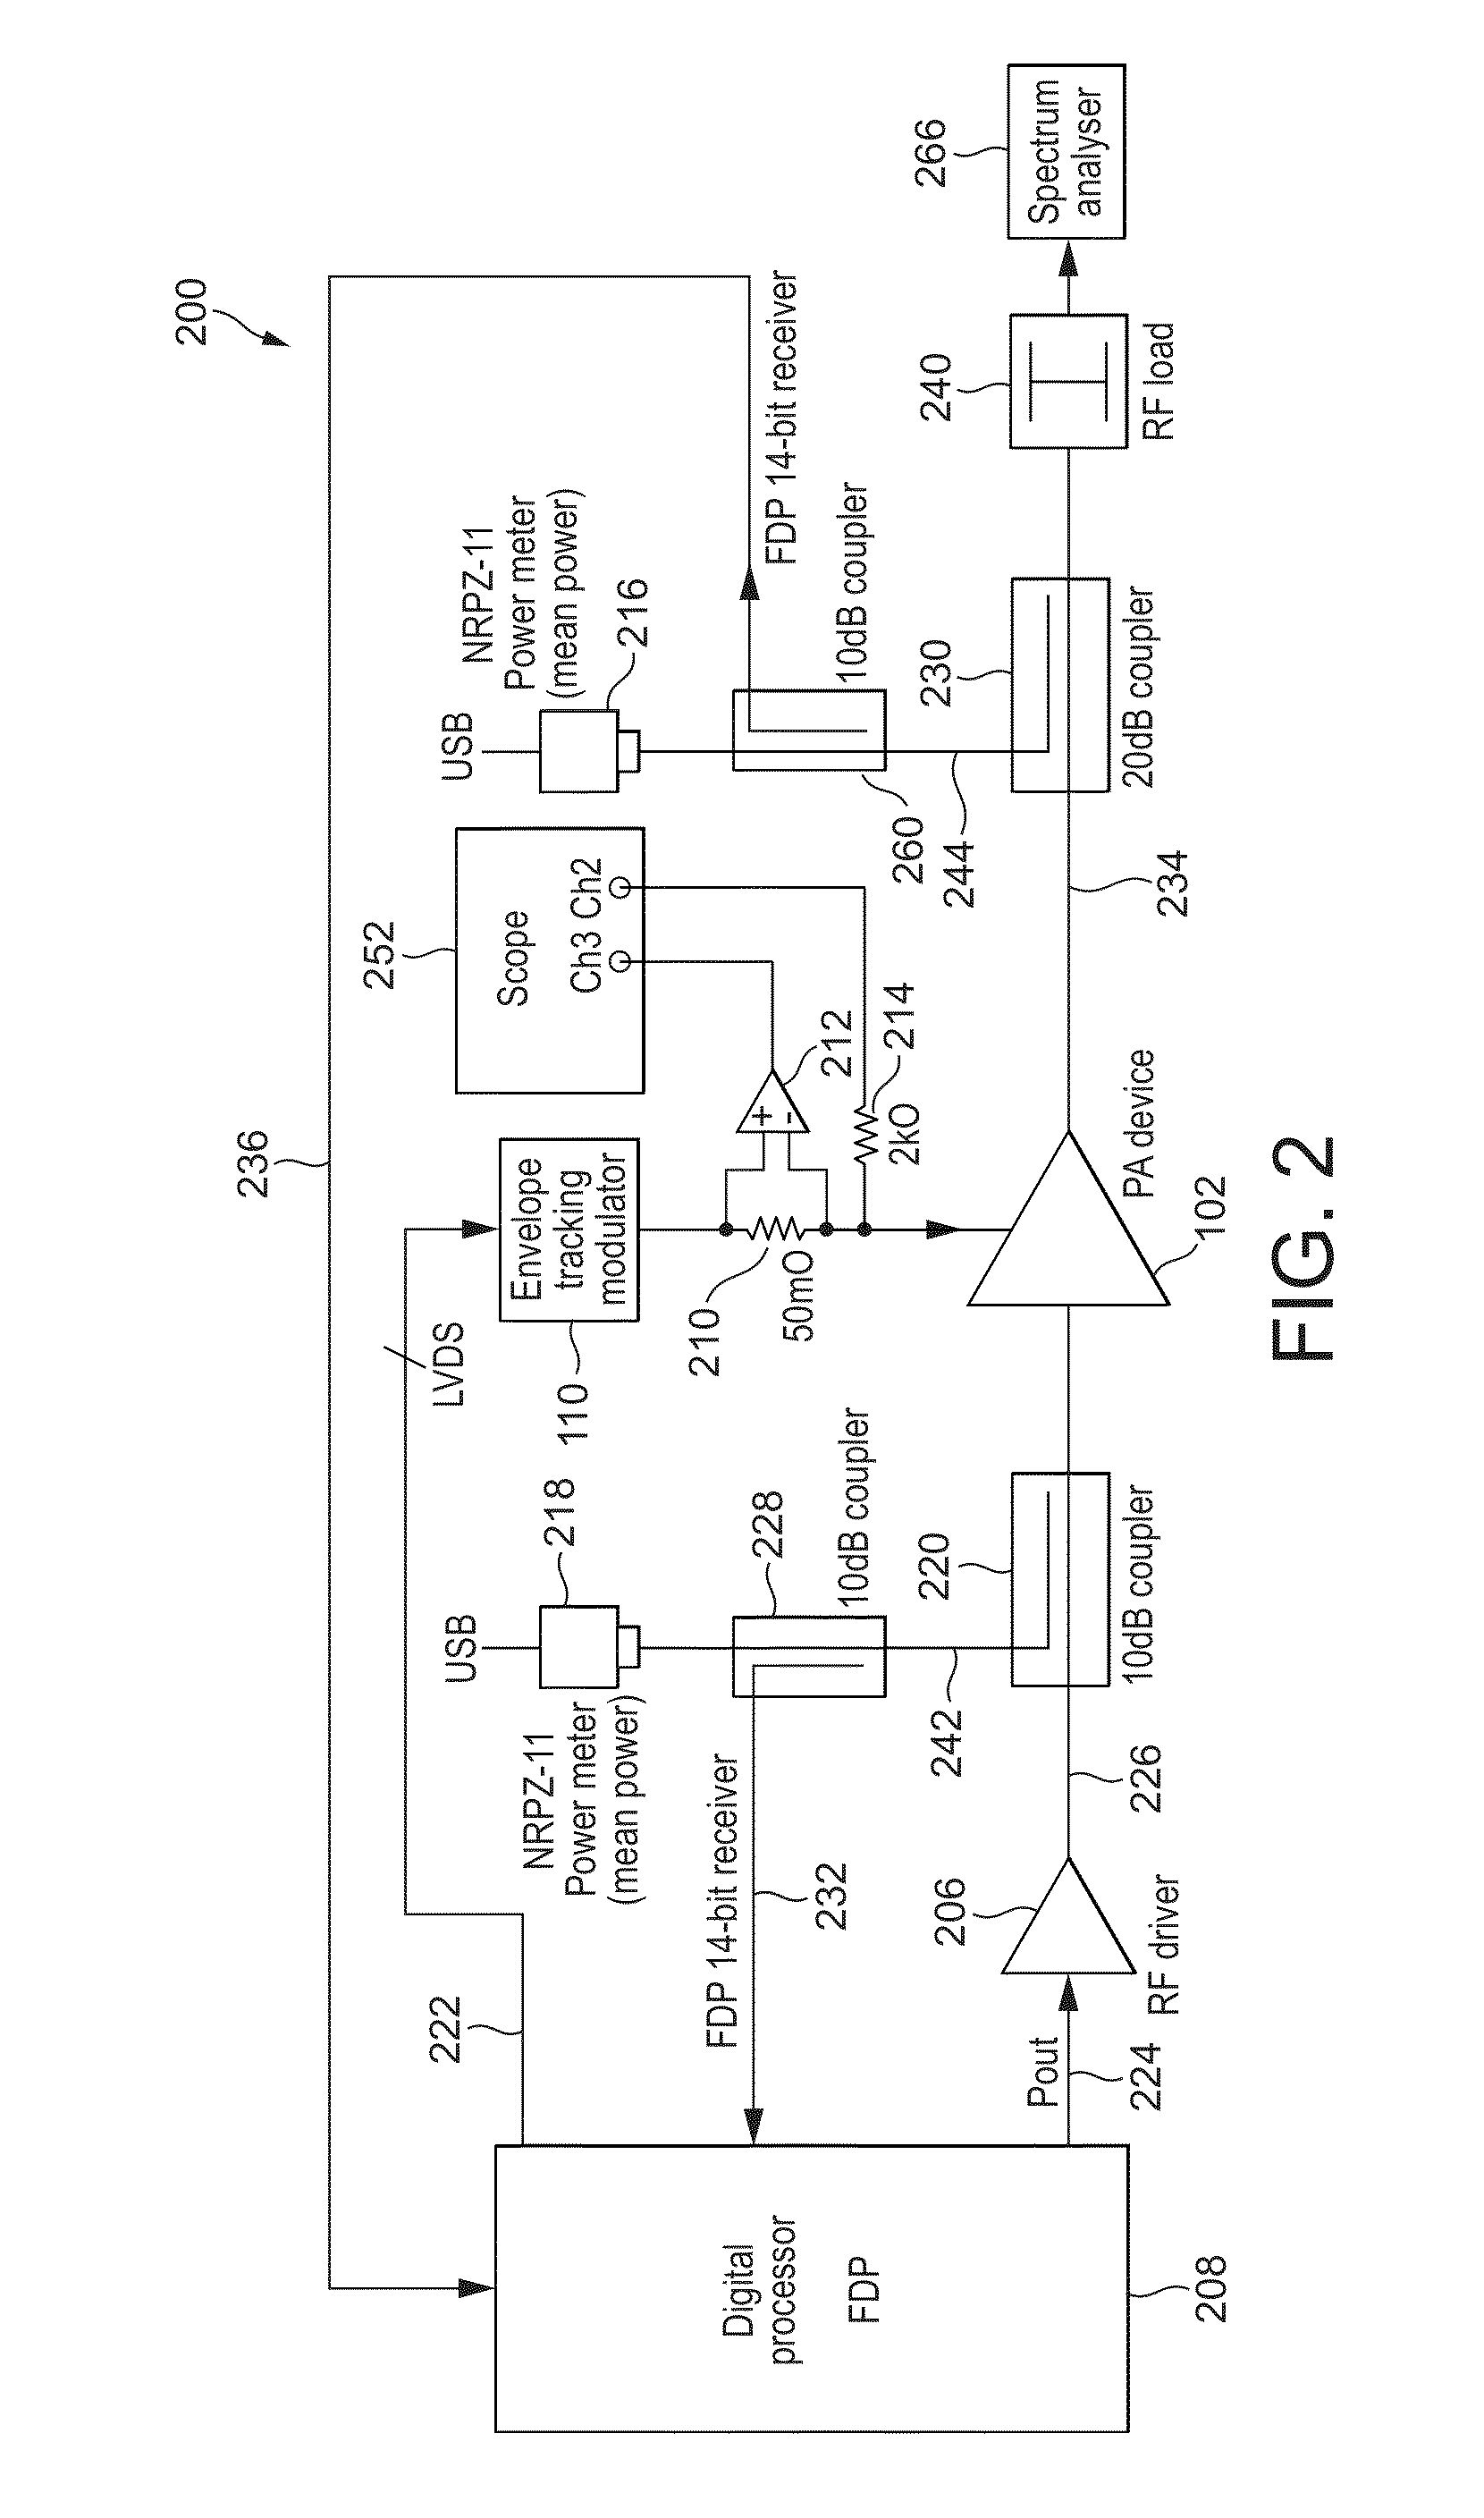 Dynamic characterisation of amplifier AM-PM distortion